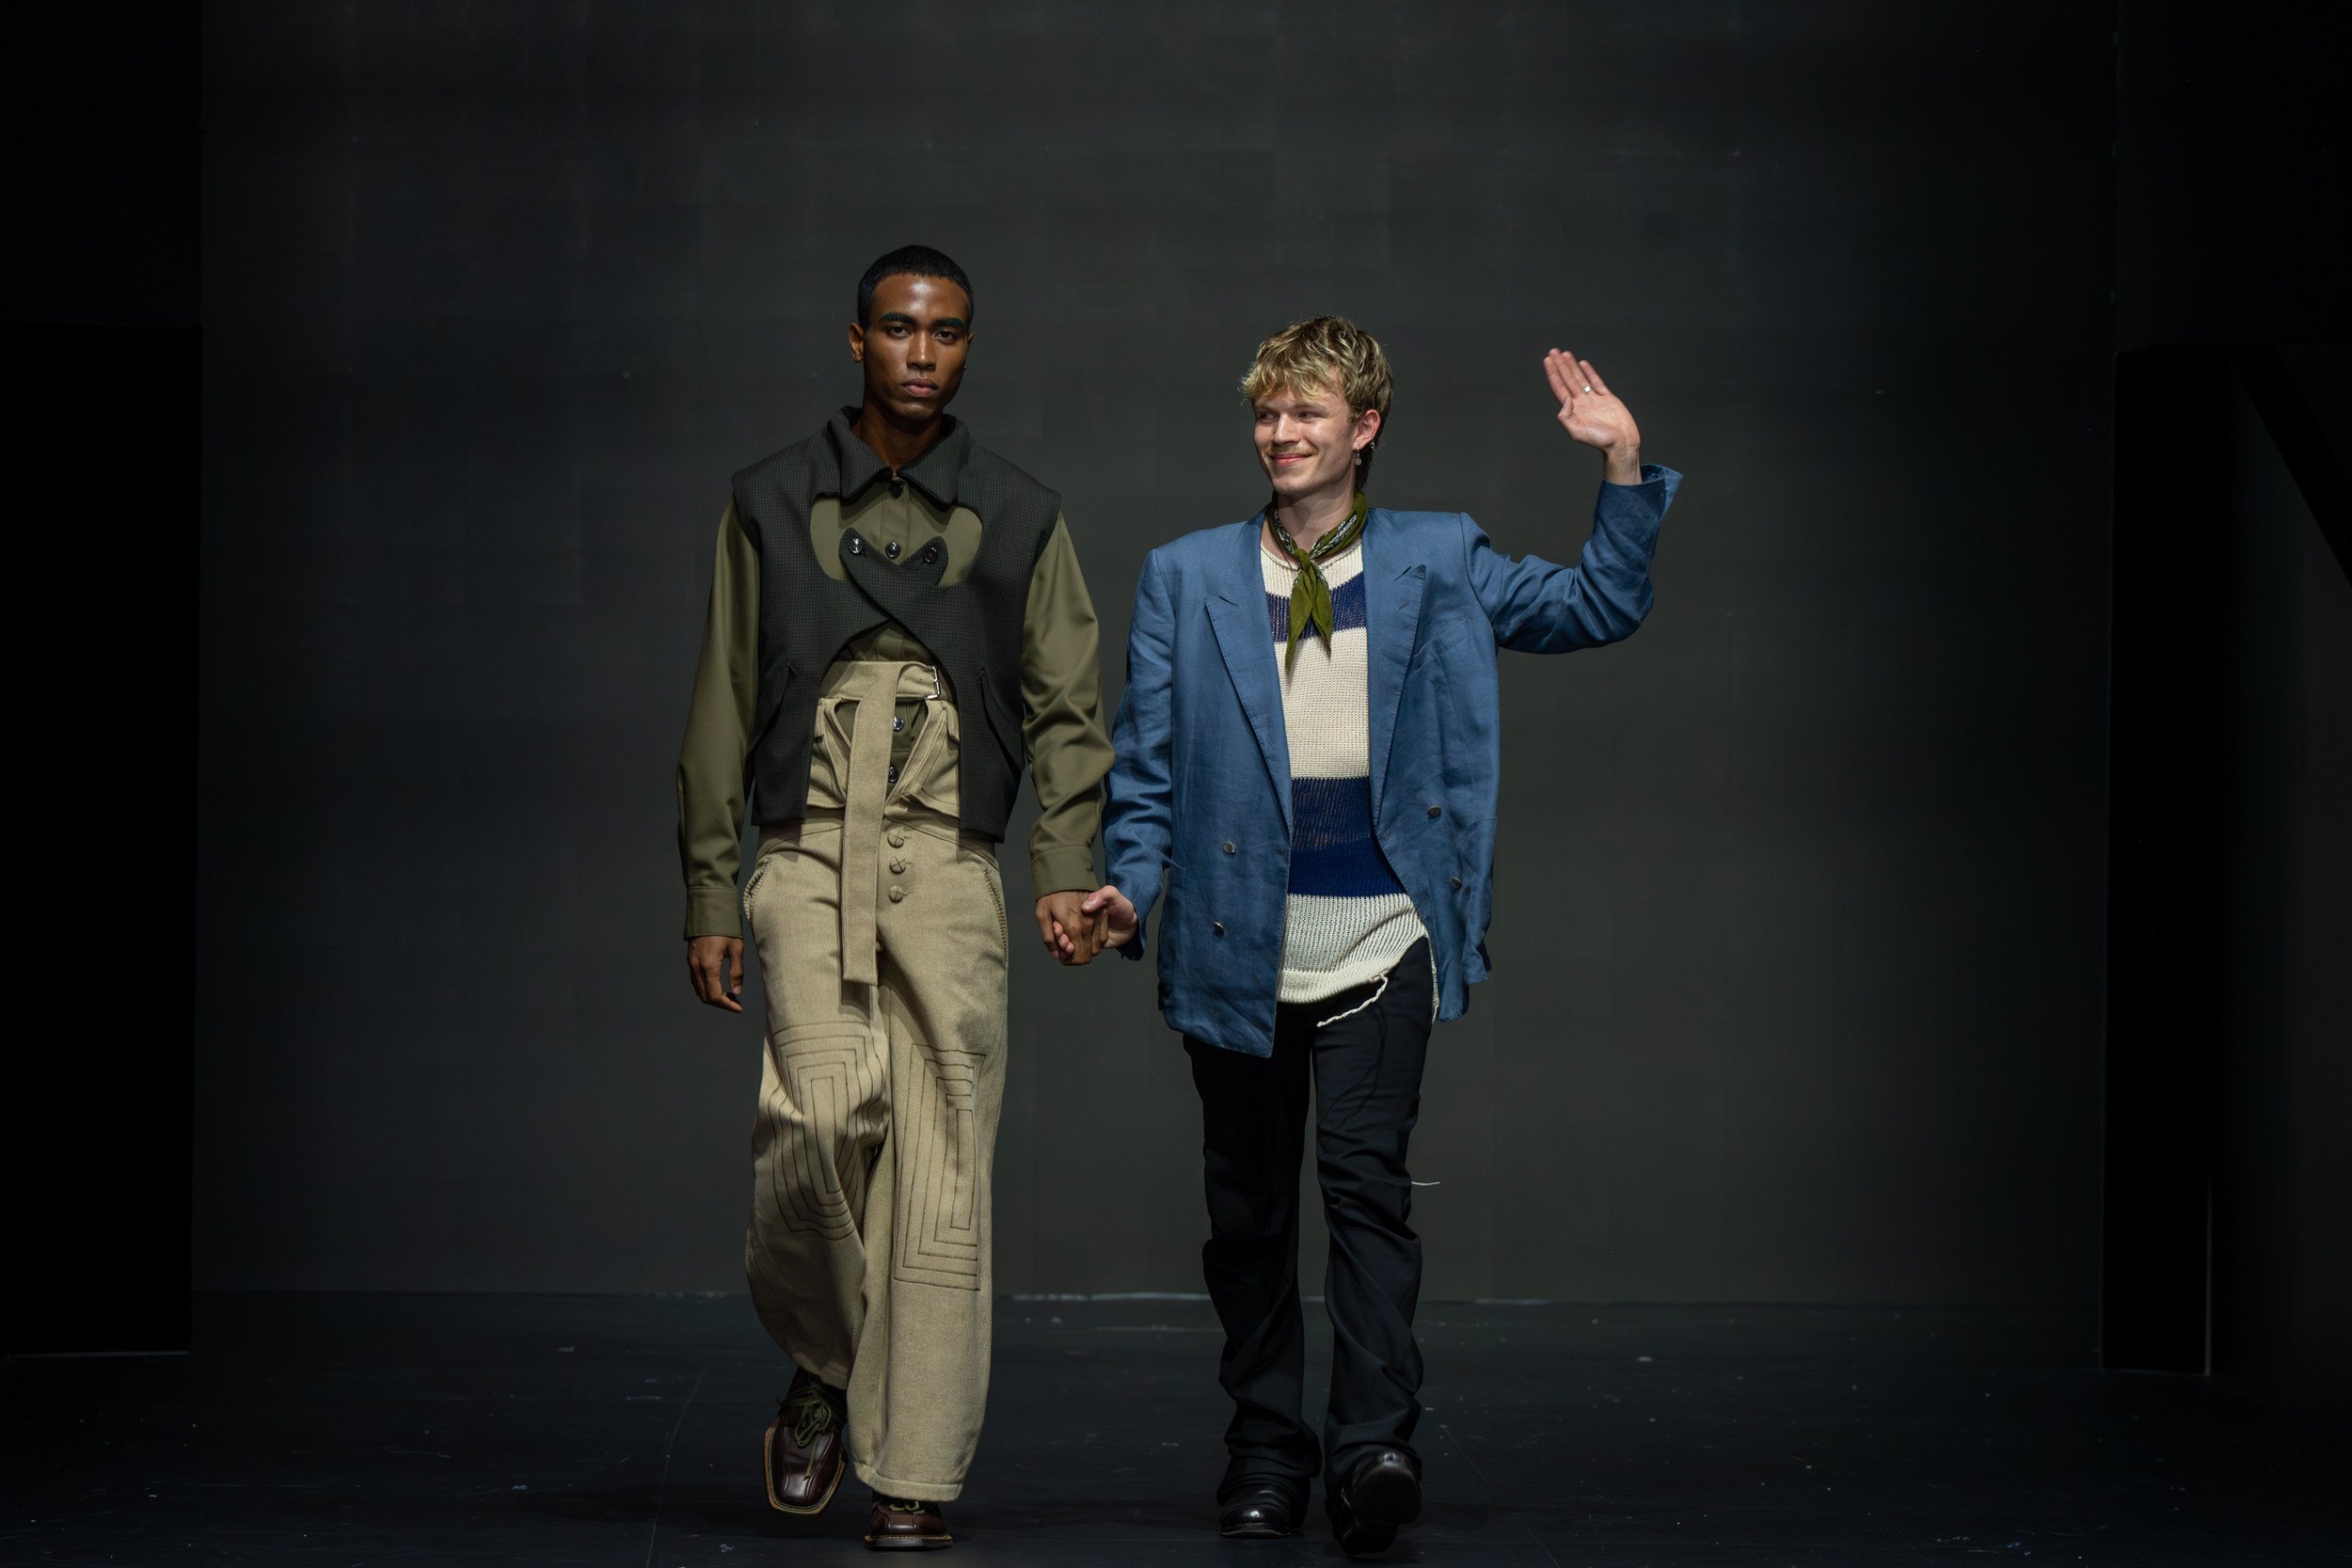 In this issue of the Global Impact, we look back at the recent trends from New York, London, Milan and Paris fashion weeks as sustainability and cultural diversity strutted their stuff. Photo: Redress